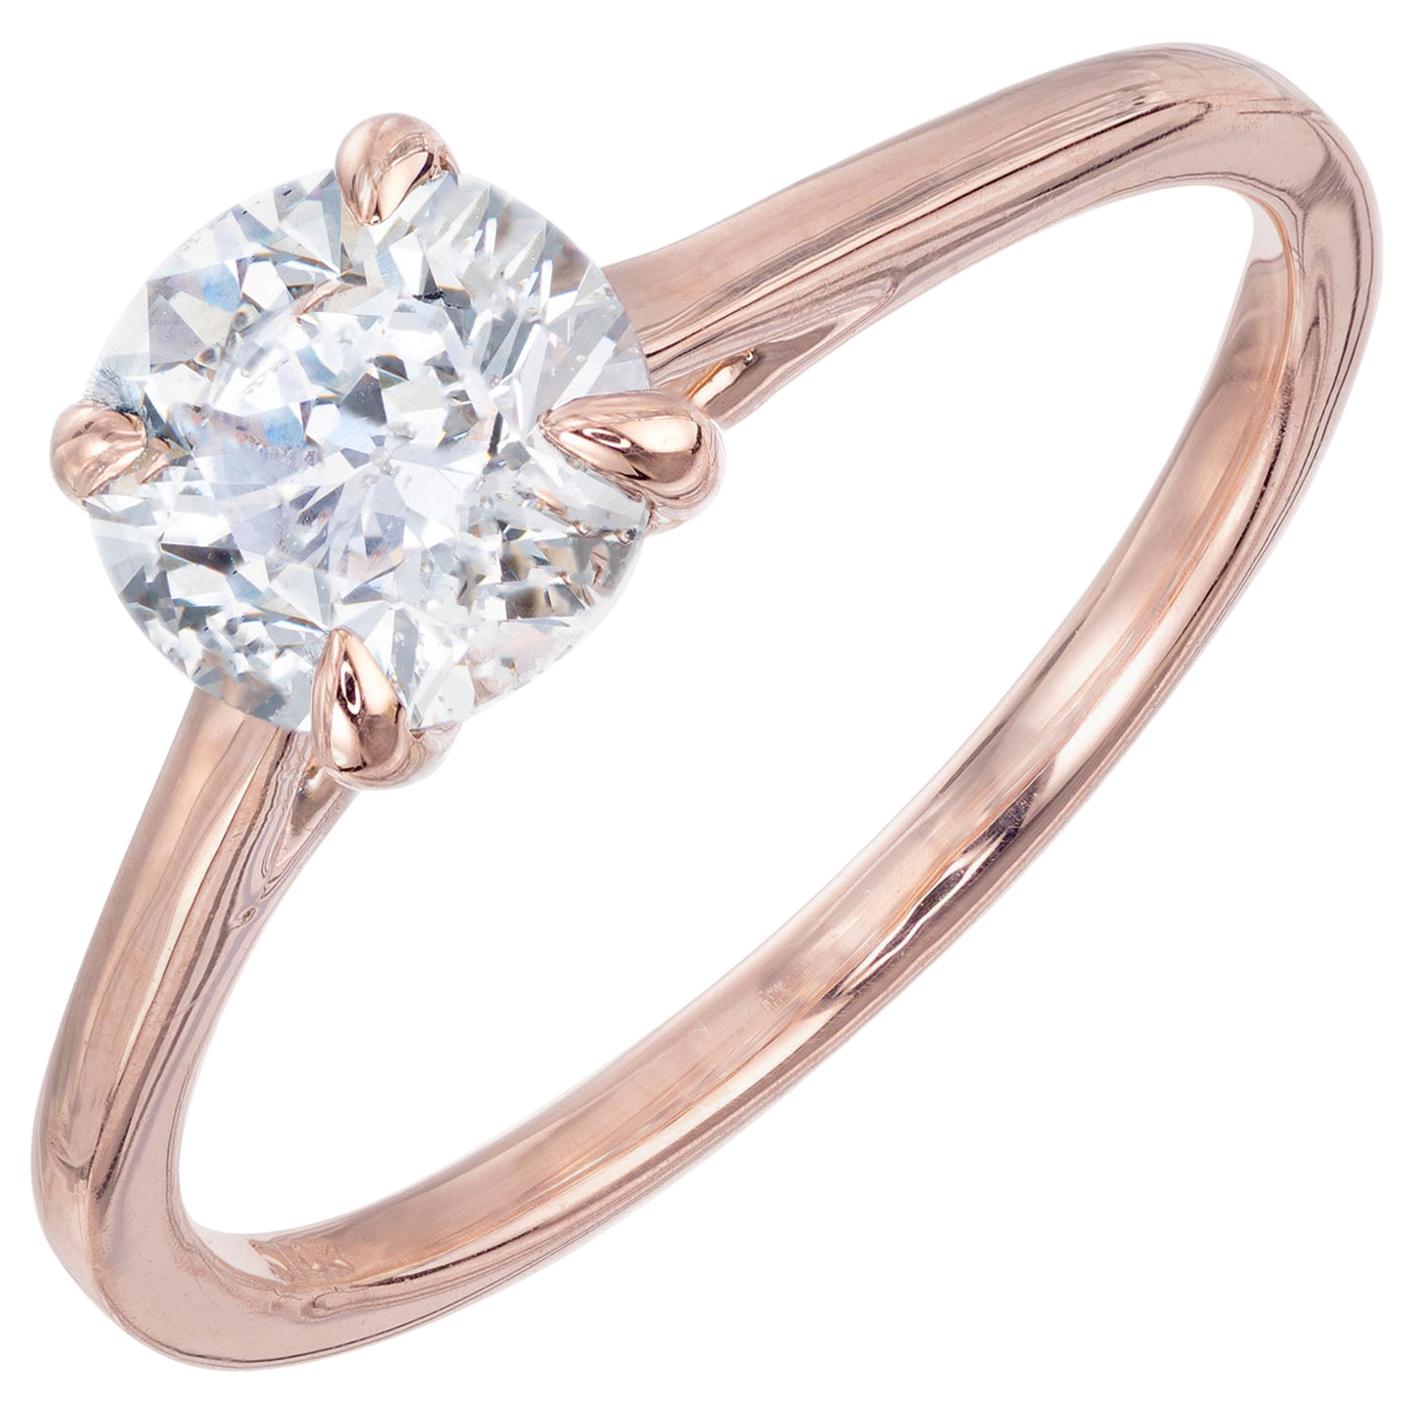 Peter Suchy GIA Certified 1.12 Carat Diamond Rose Gold Solitaire Engagement Ring